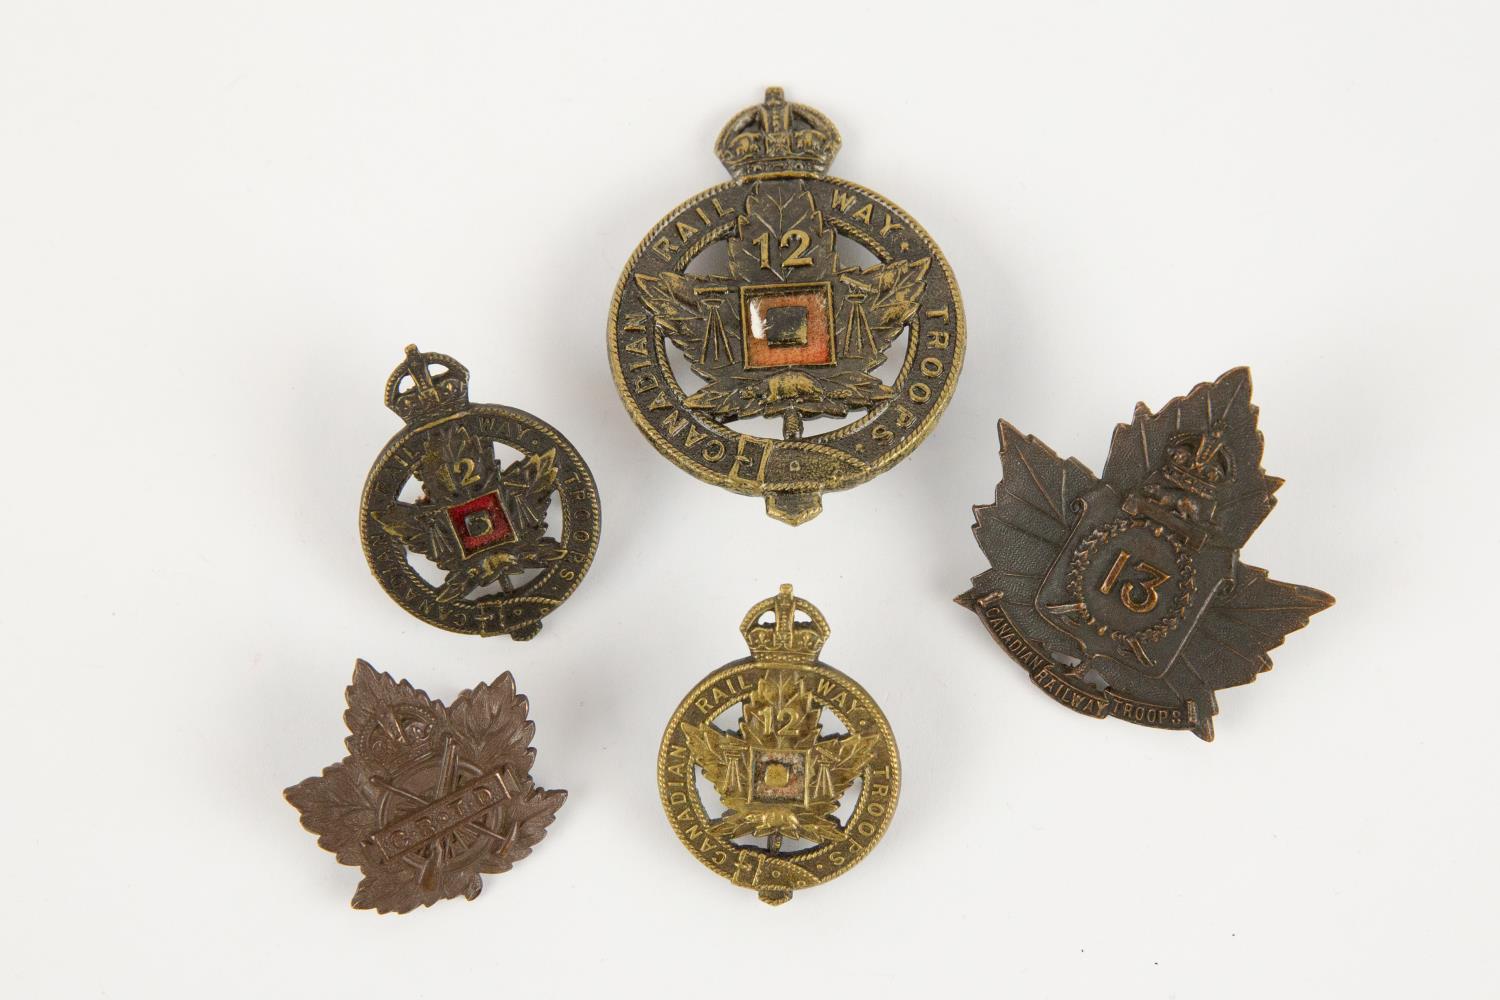 WWI CEF Railway Troops badges: 12th Bn cap badge and pair of collar badges, all by Gaunt, 13th Bn